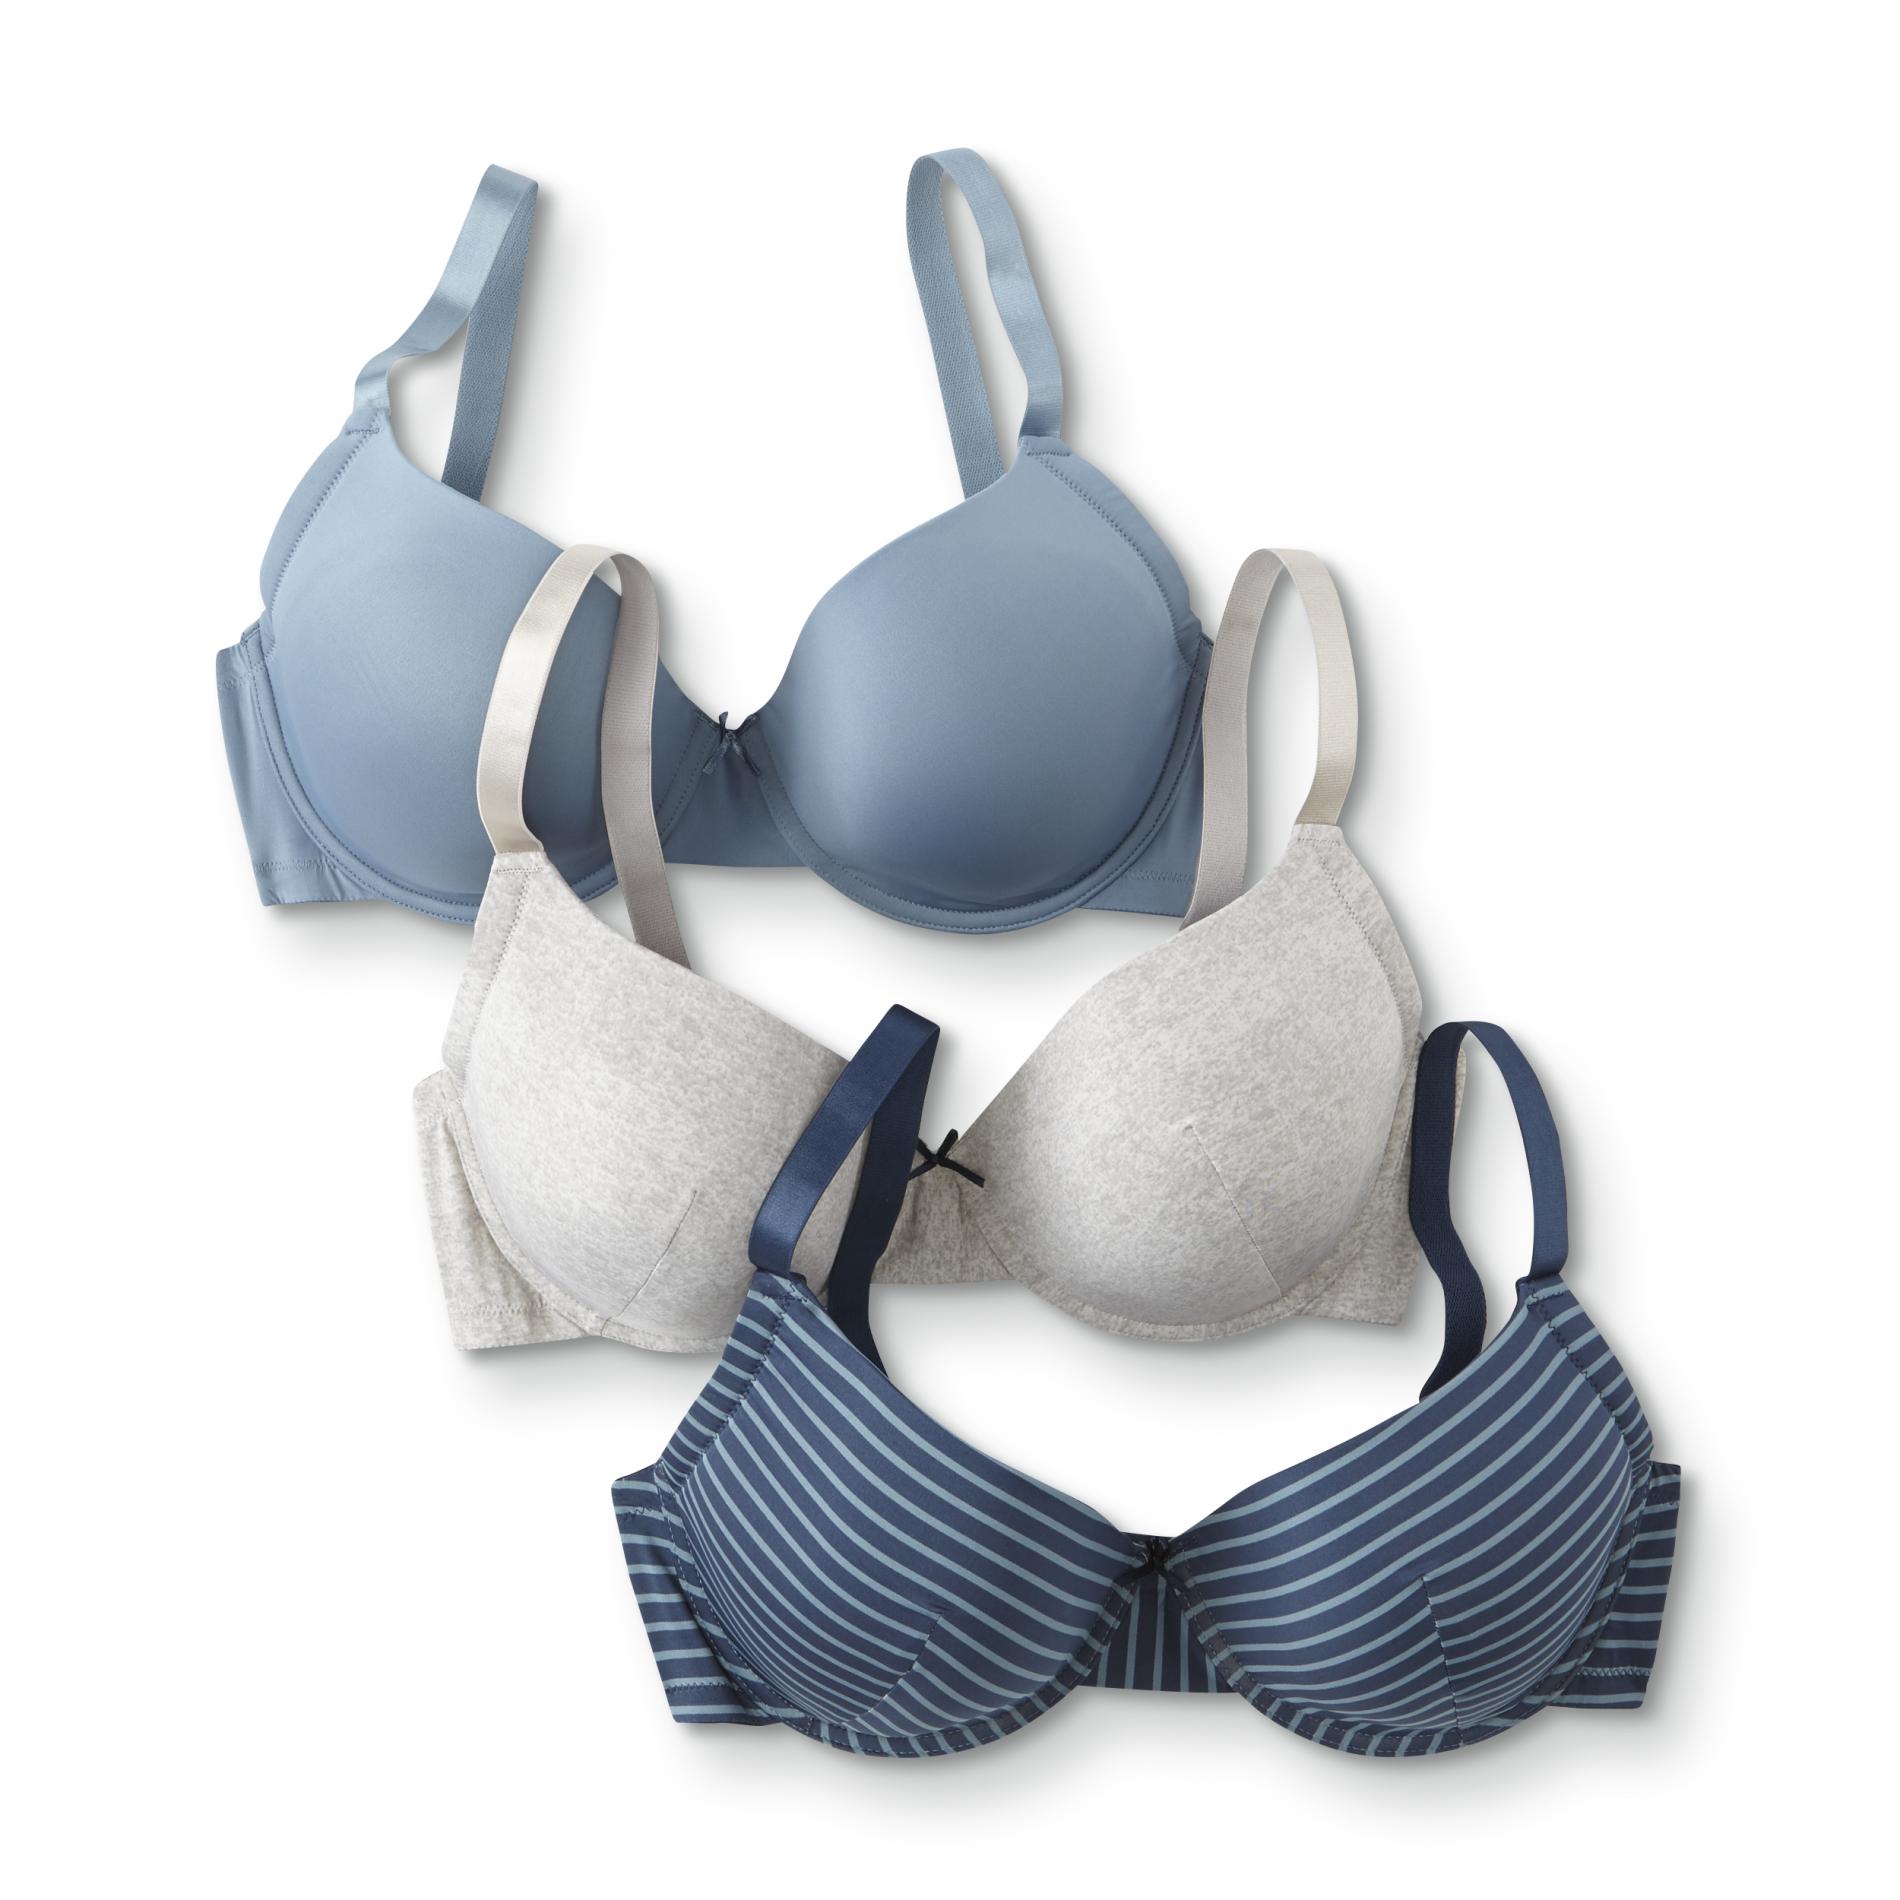 Simply Emma Women's Full-Figure 3-Pack T-Shirt Bras - Solid & Striped